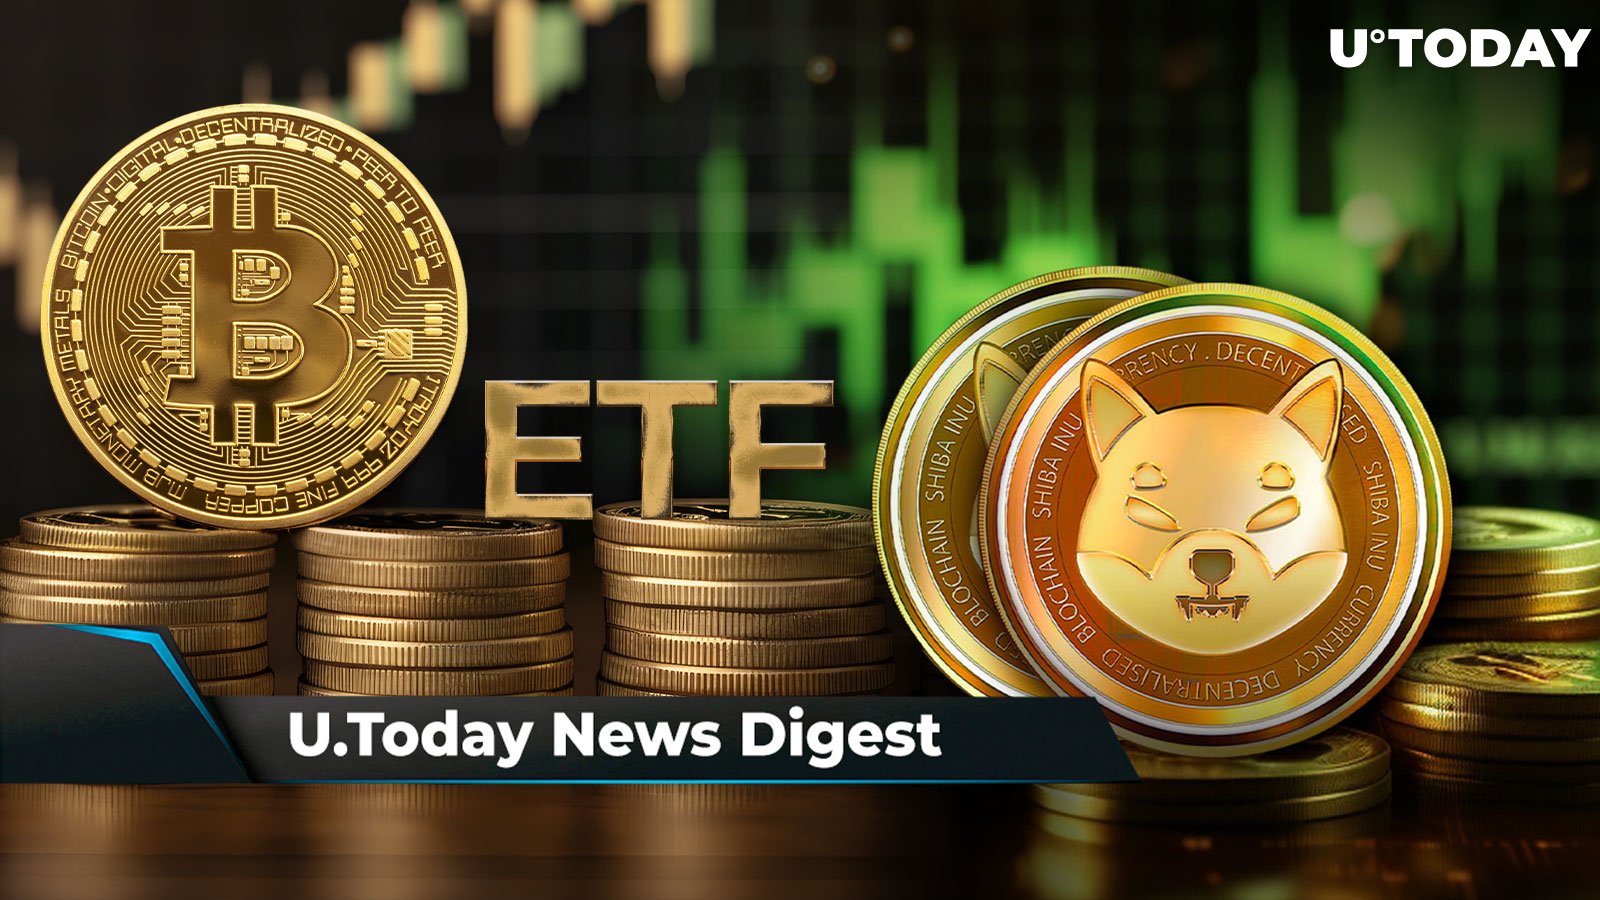 Wall Street Eyes $100 Billion Potential for Bitcoin Spot ETF, Three Reasons Why SHIB Wallets Soared 14,793% in 20 Months, Ripple CTO Spooks XRP Army: Crypto News Digest by U.Today